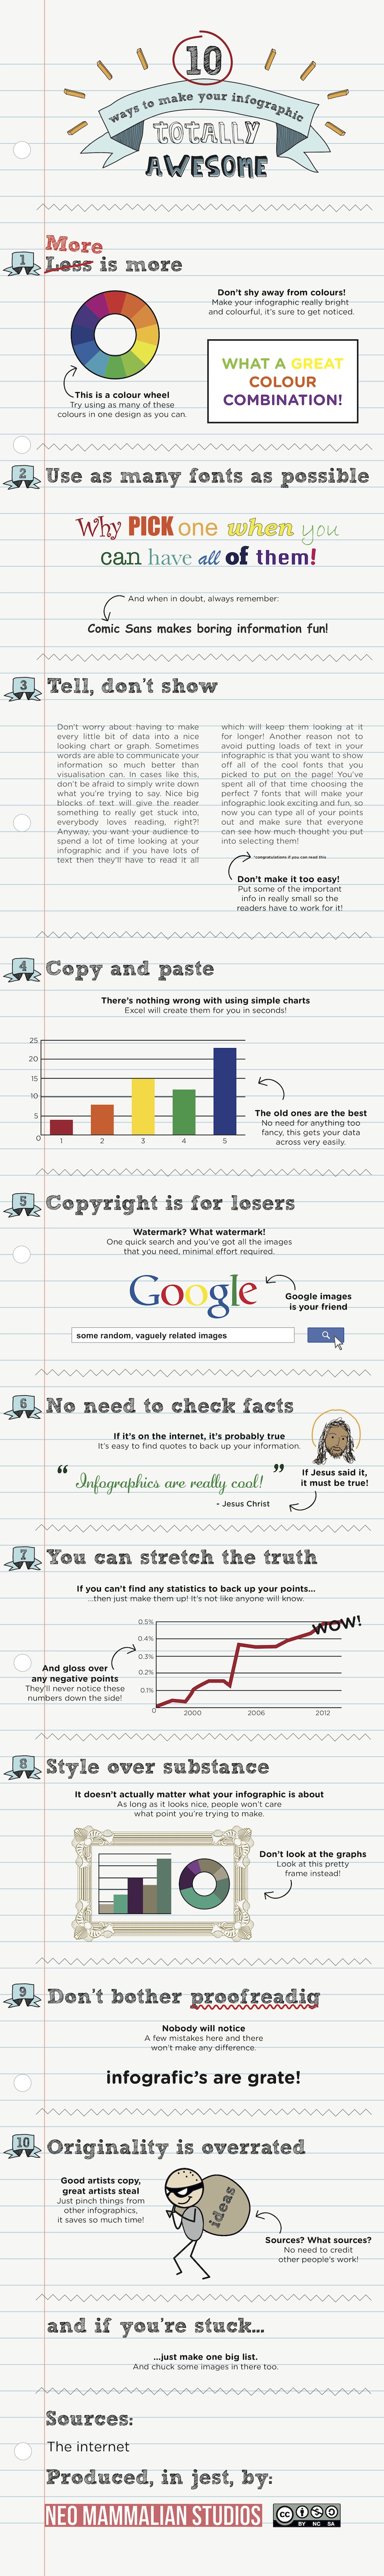 10 Ways to Make Your Infographic Totally NOT Awesome